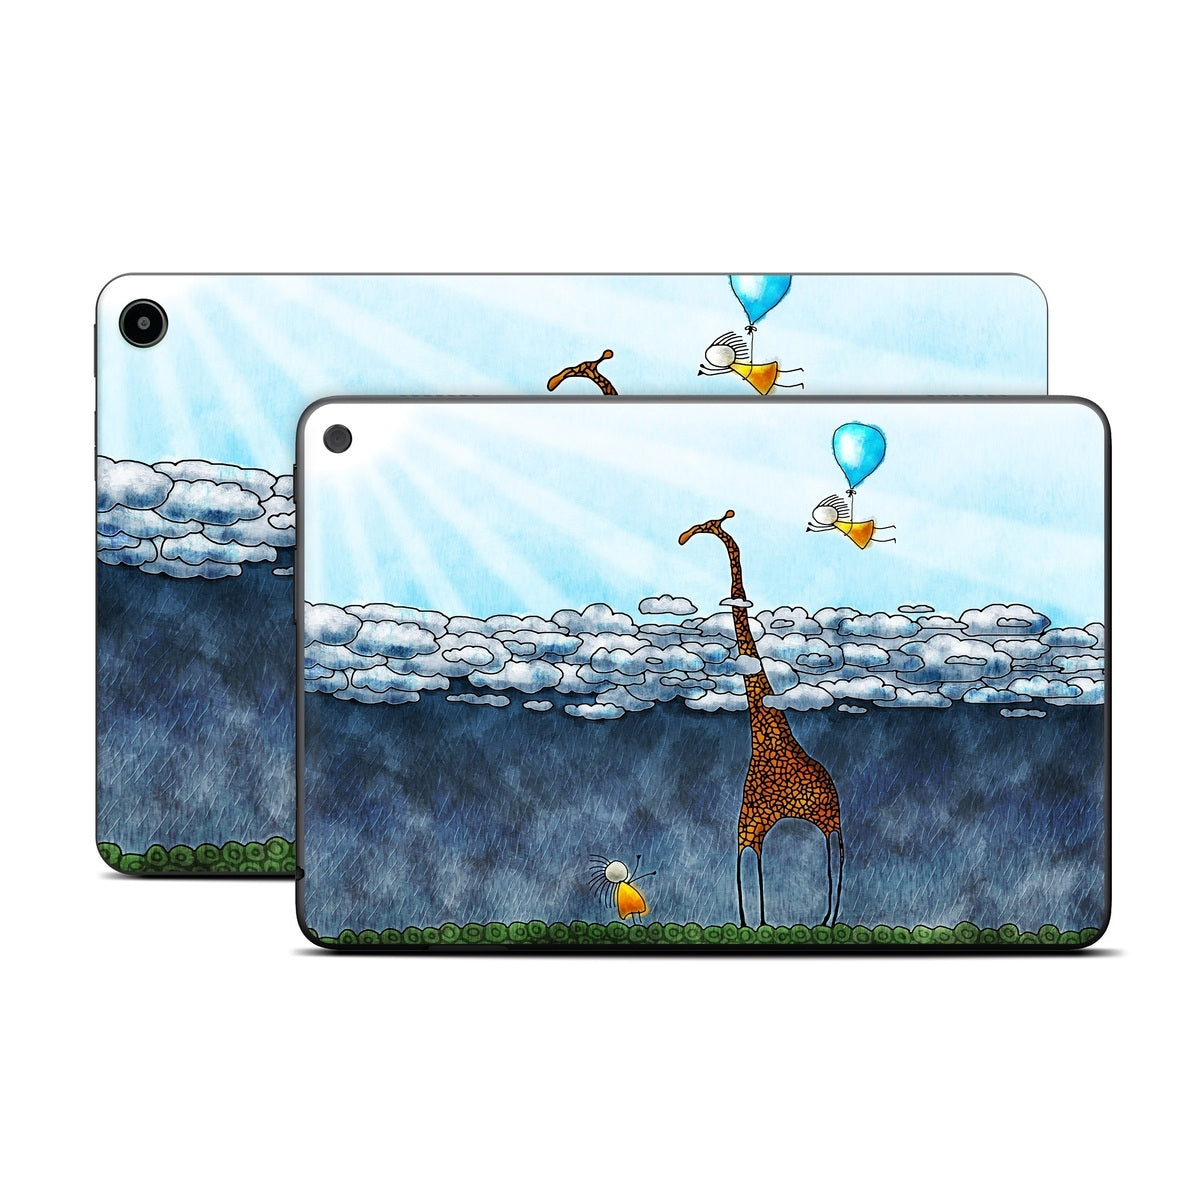 Above The Clouds - Amazon Fire Skin